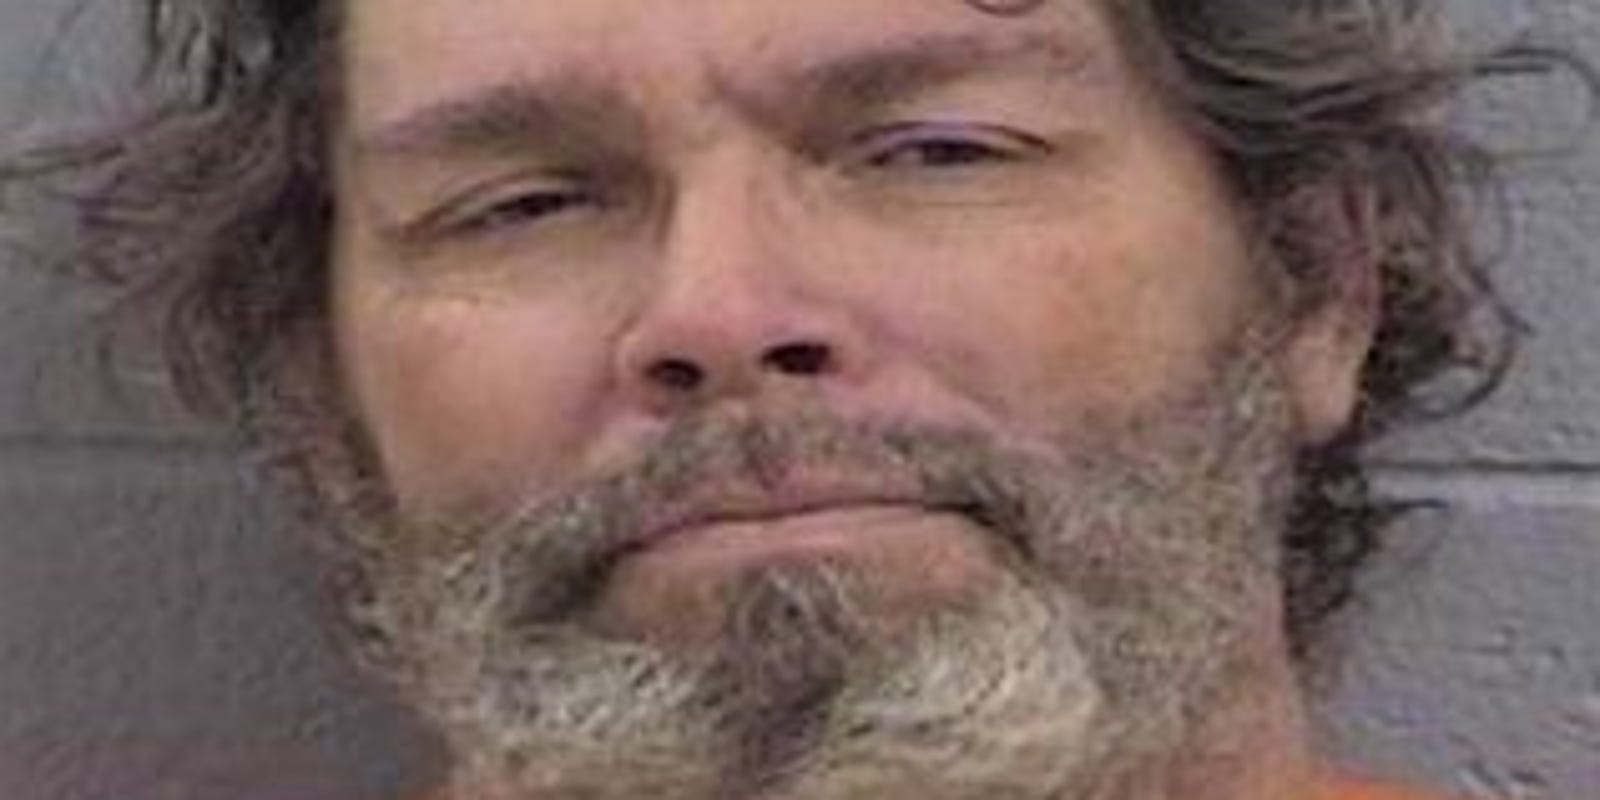 Sex Phonography - Flora Vista man with 13 sex charges accused of child pornography